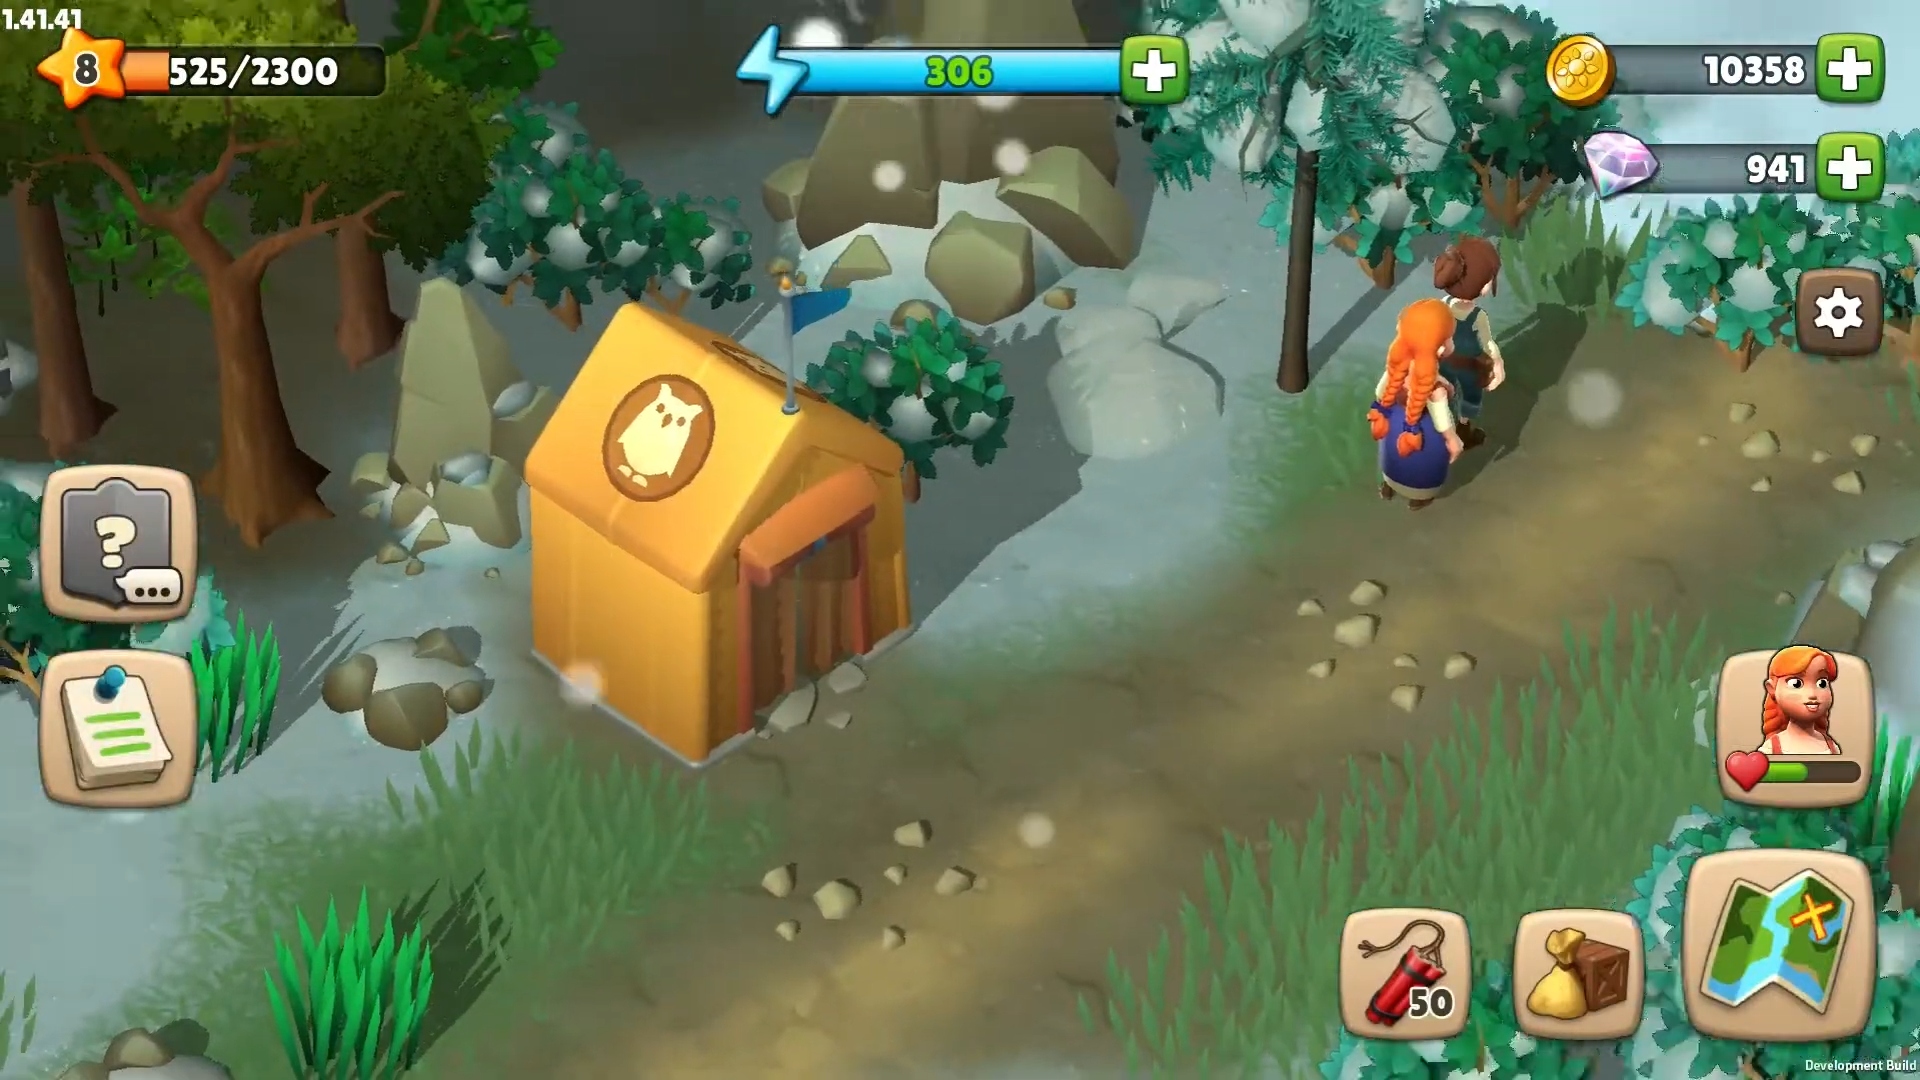 Best mobile games - Sunrise Village. A screenshot shows to people in a snowy farm area.